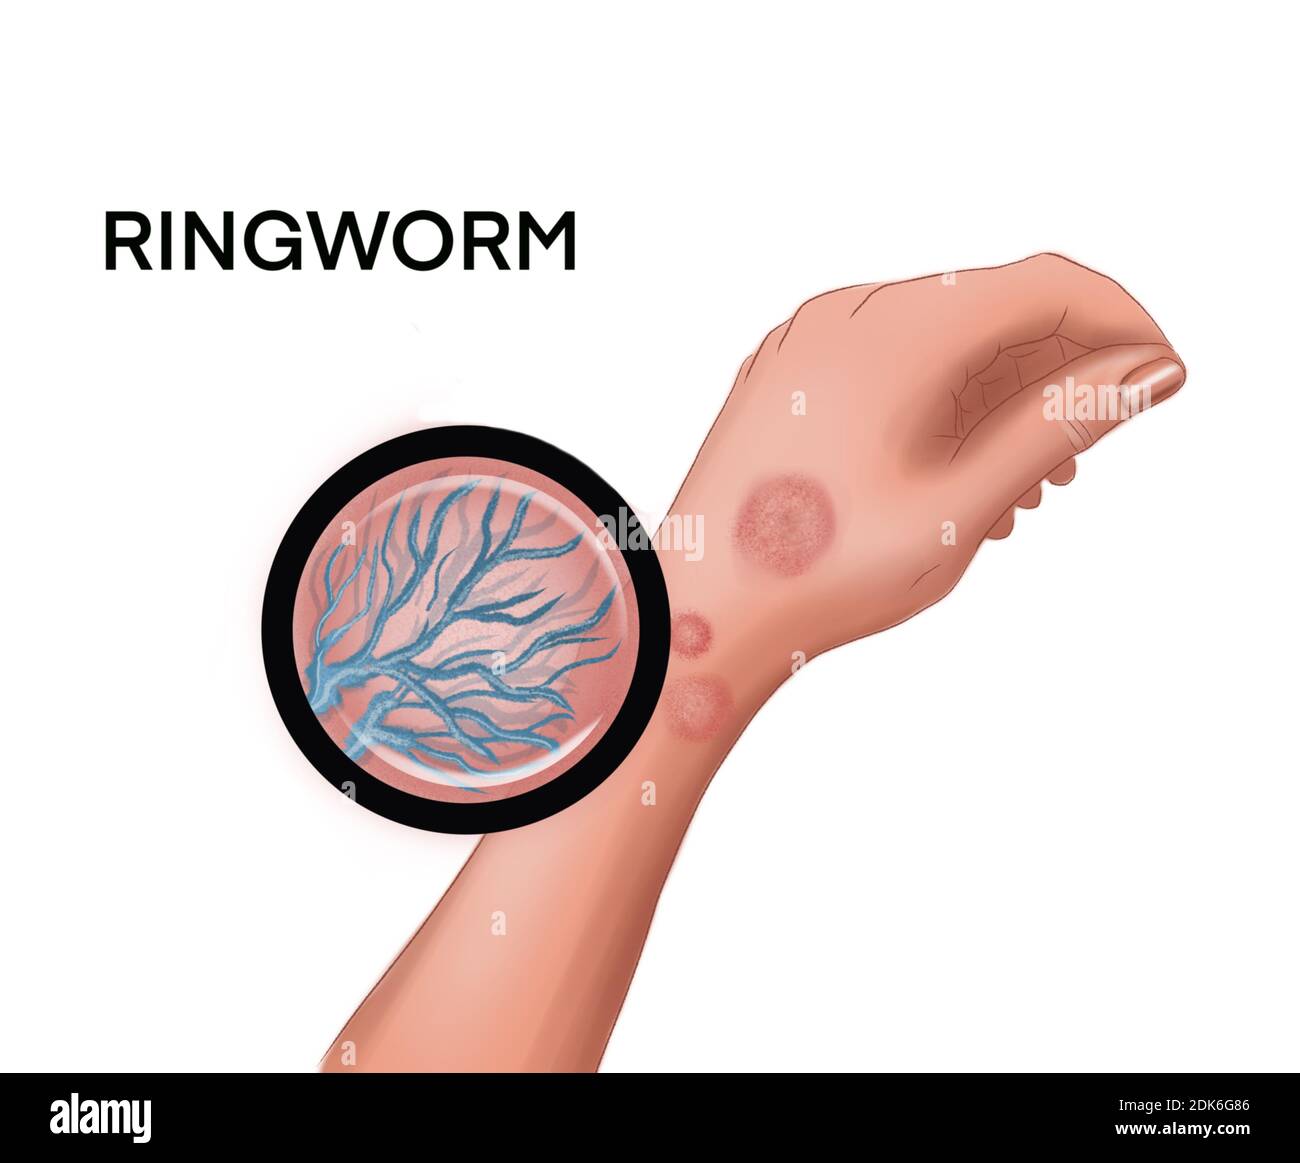 Illustration of the ringworm on the hand Stock Photo